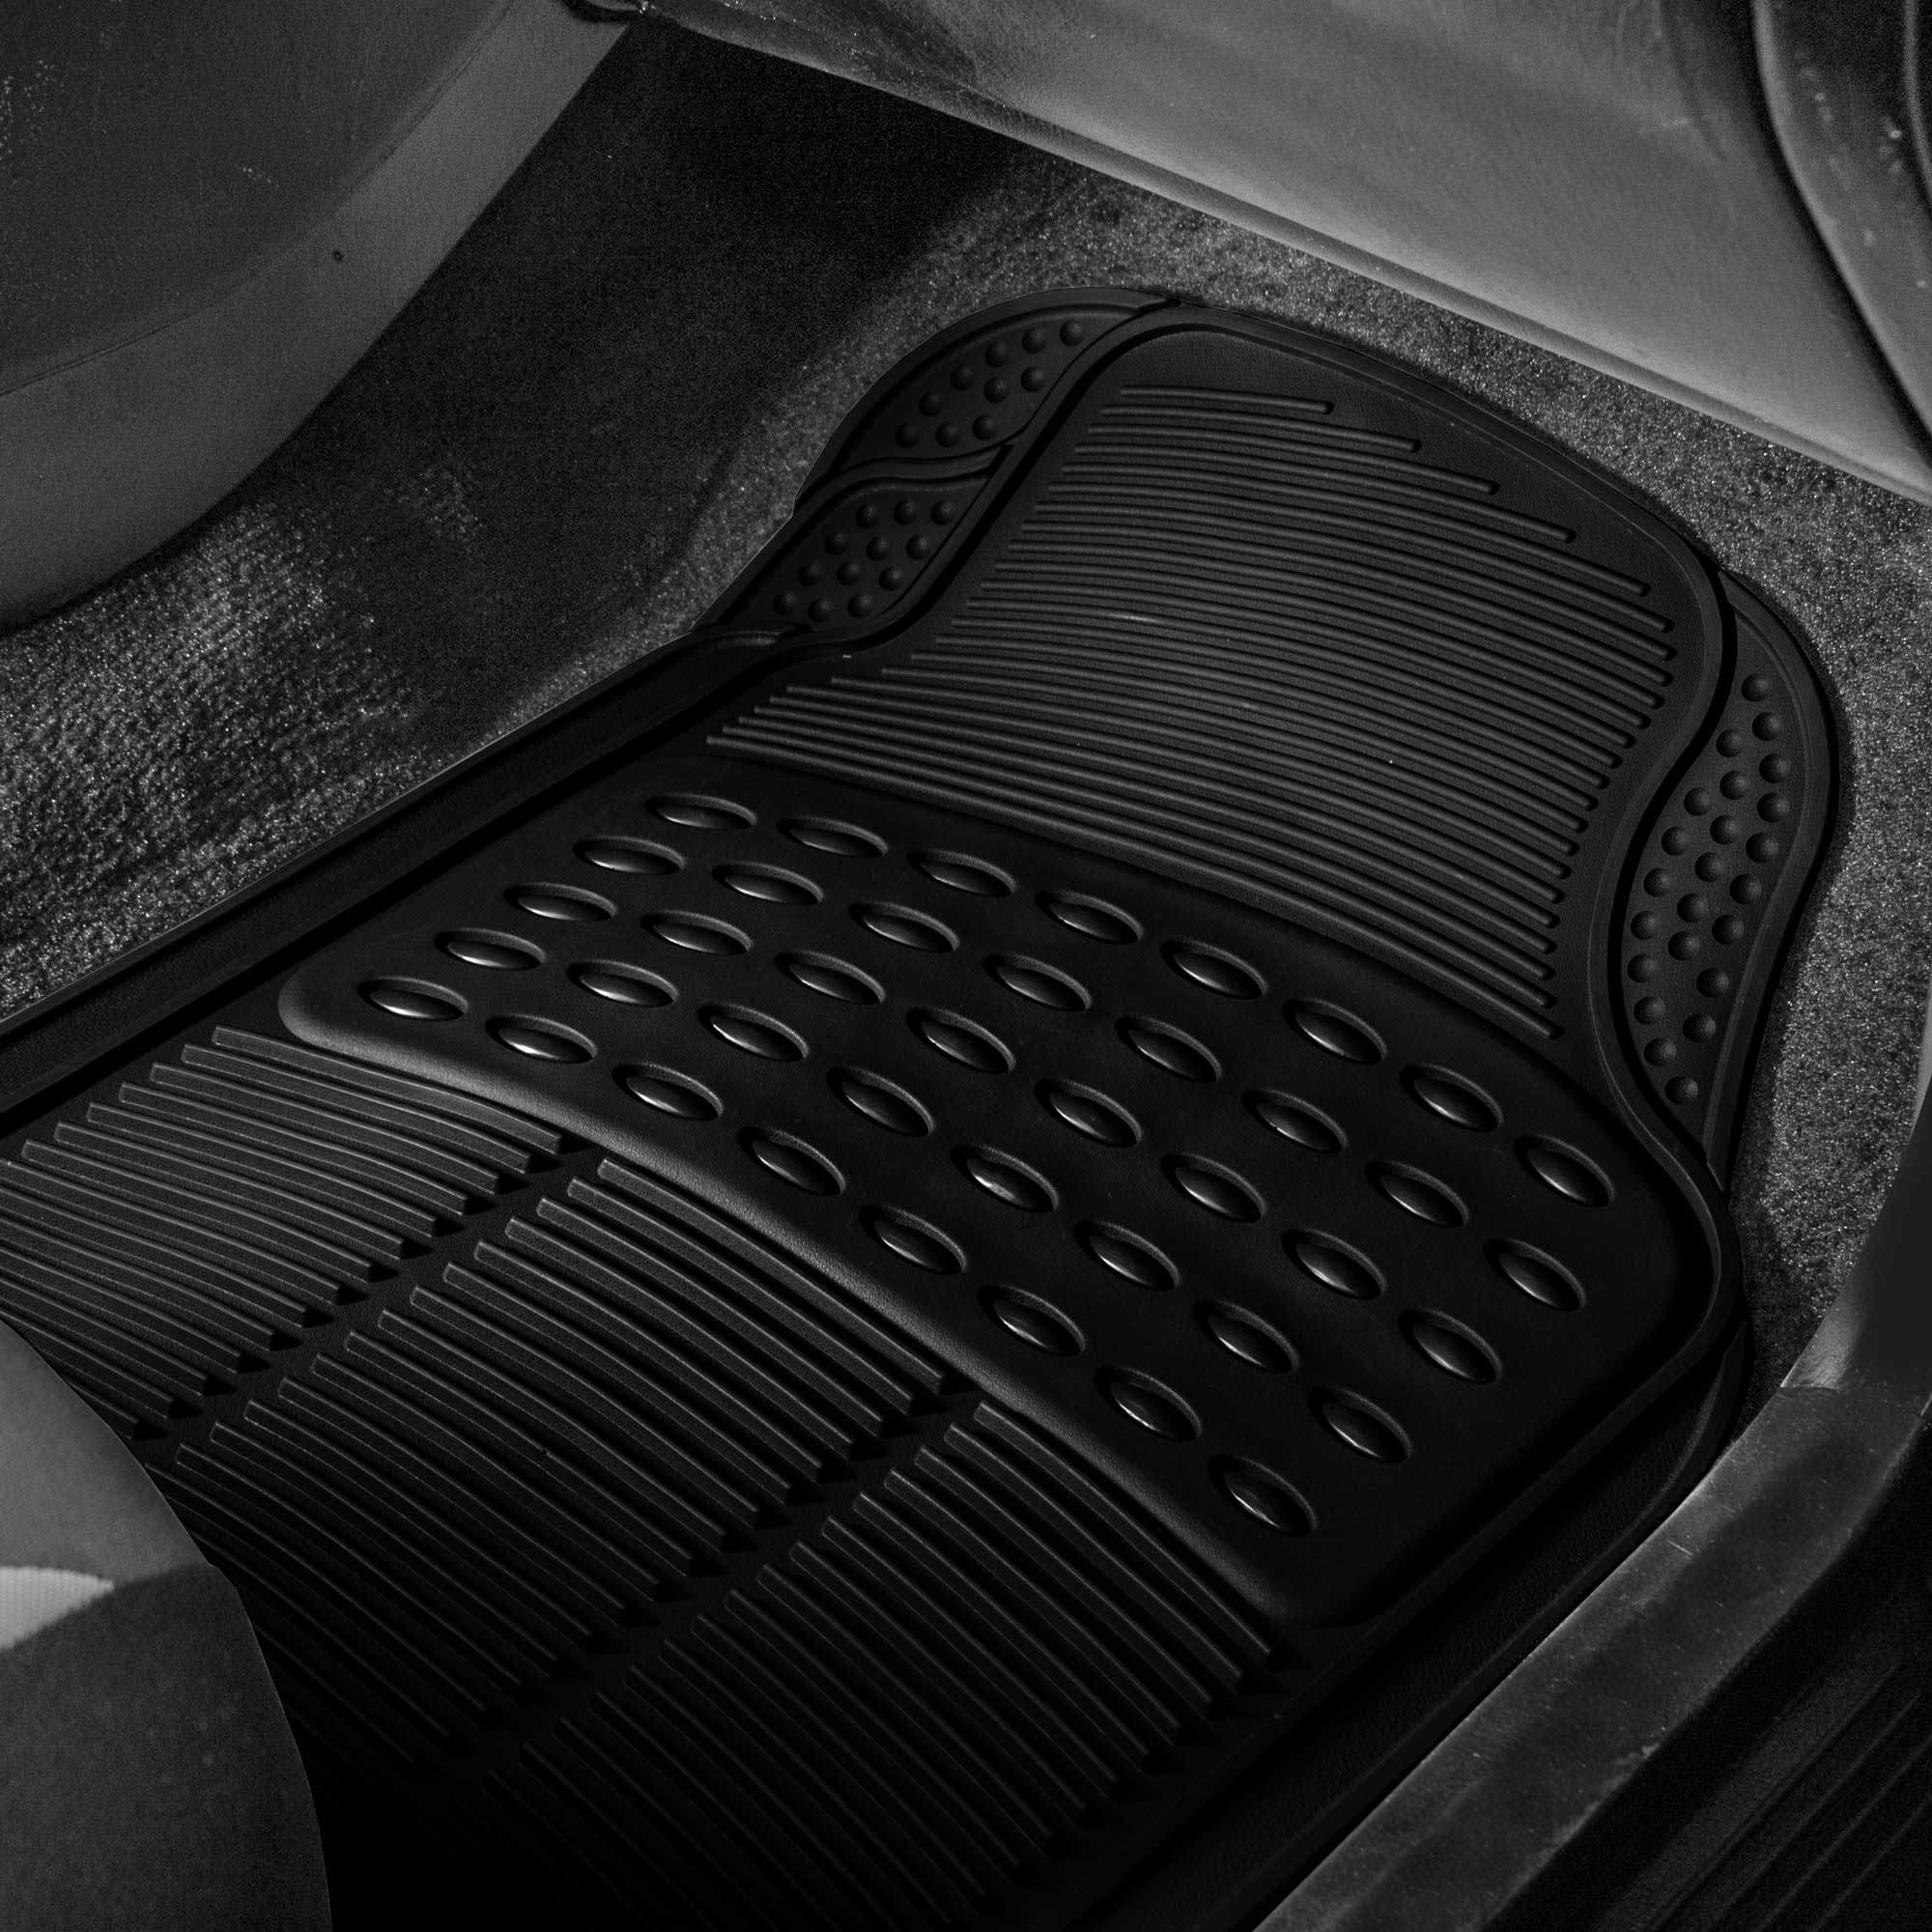 FH Group Universal Fit Rubber Floor Mats for Cars, Trimmable Mats for Most SUV Truck Full Set Black F11305BLACK - image 4 of 7